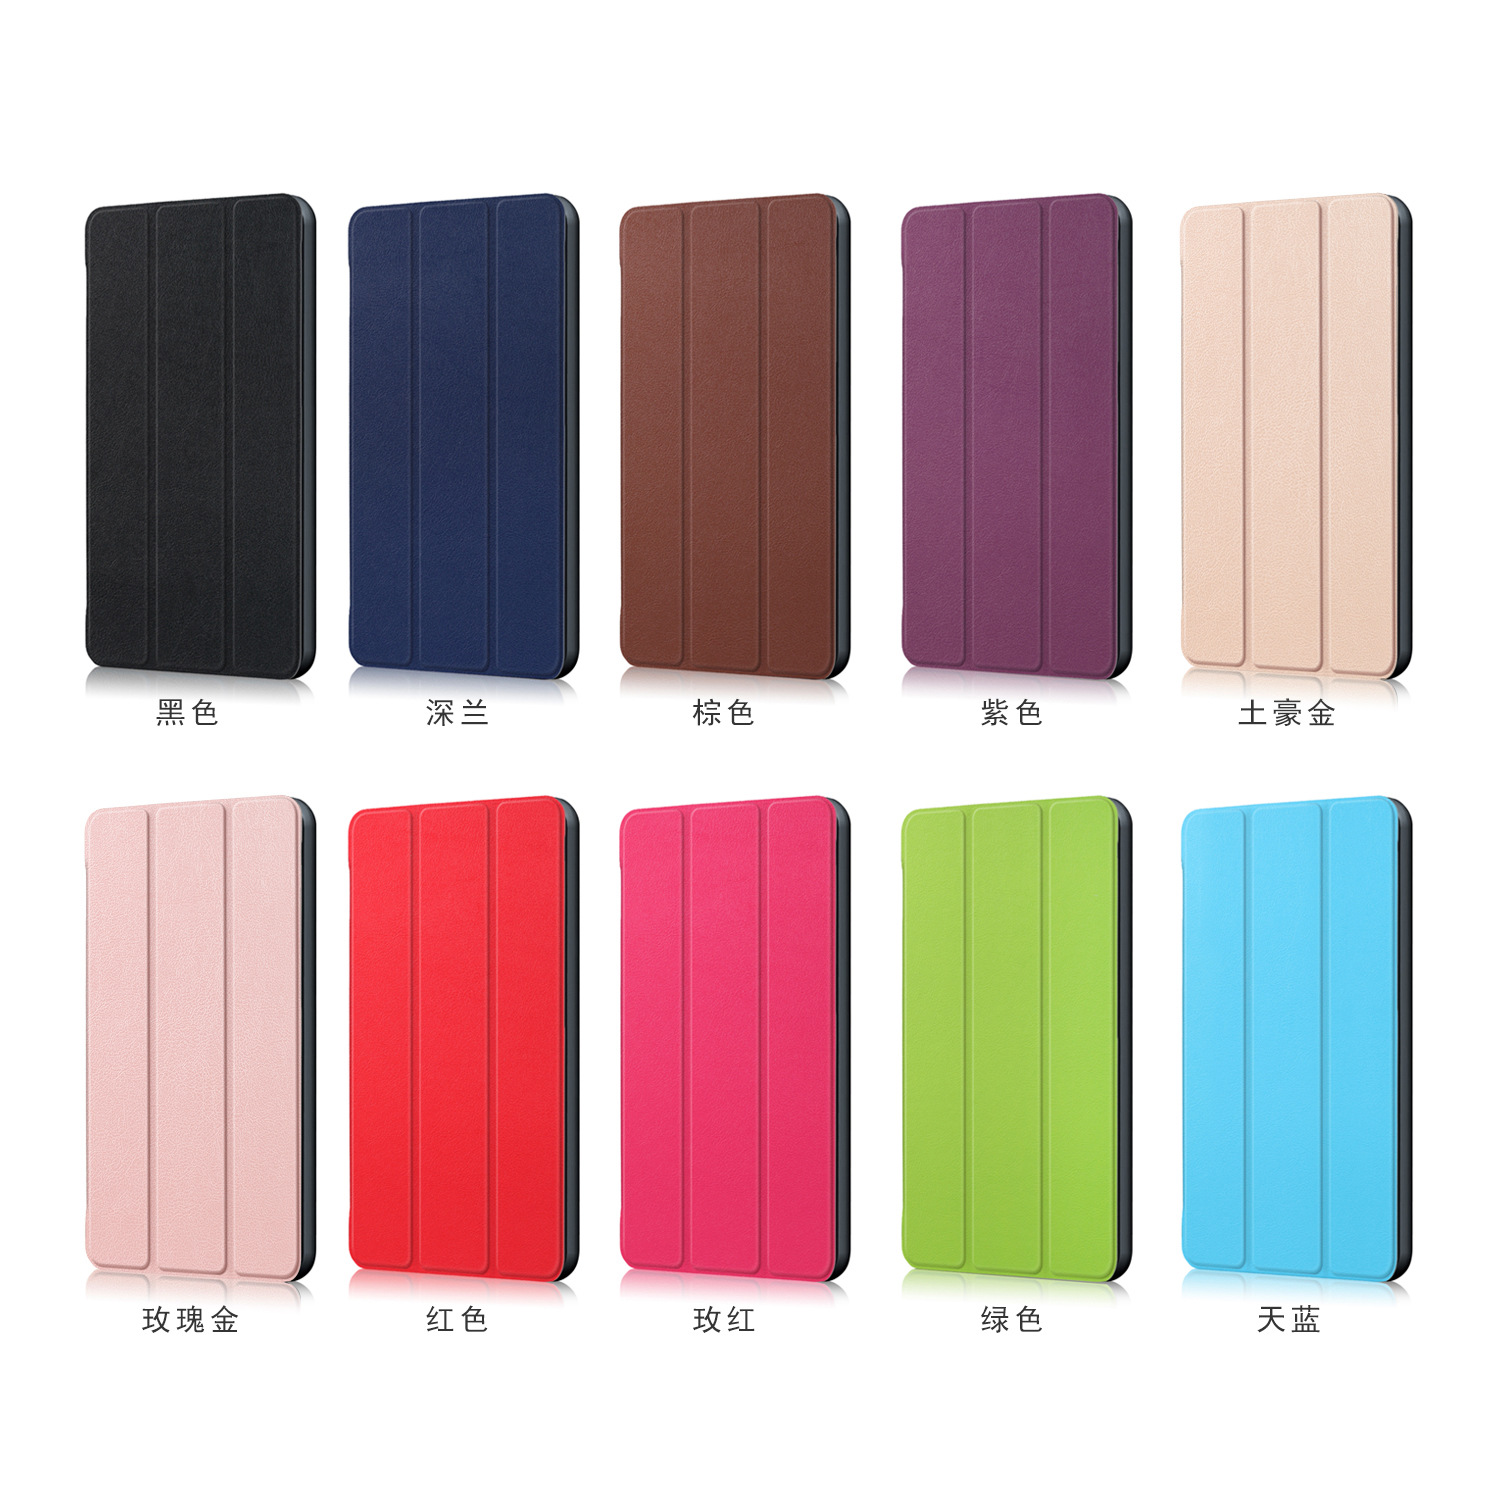 PU leather tablet hard case for Samsung Galaxy Tab A 10.1/10.5 inch Tab s7/s6/s5e/s6 lite cover for iPad model